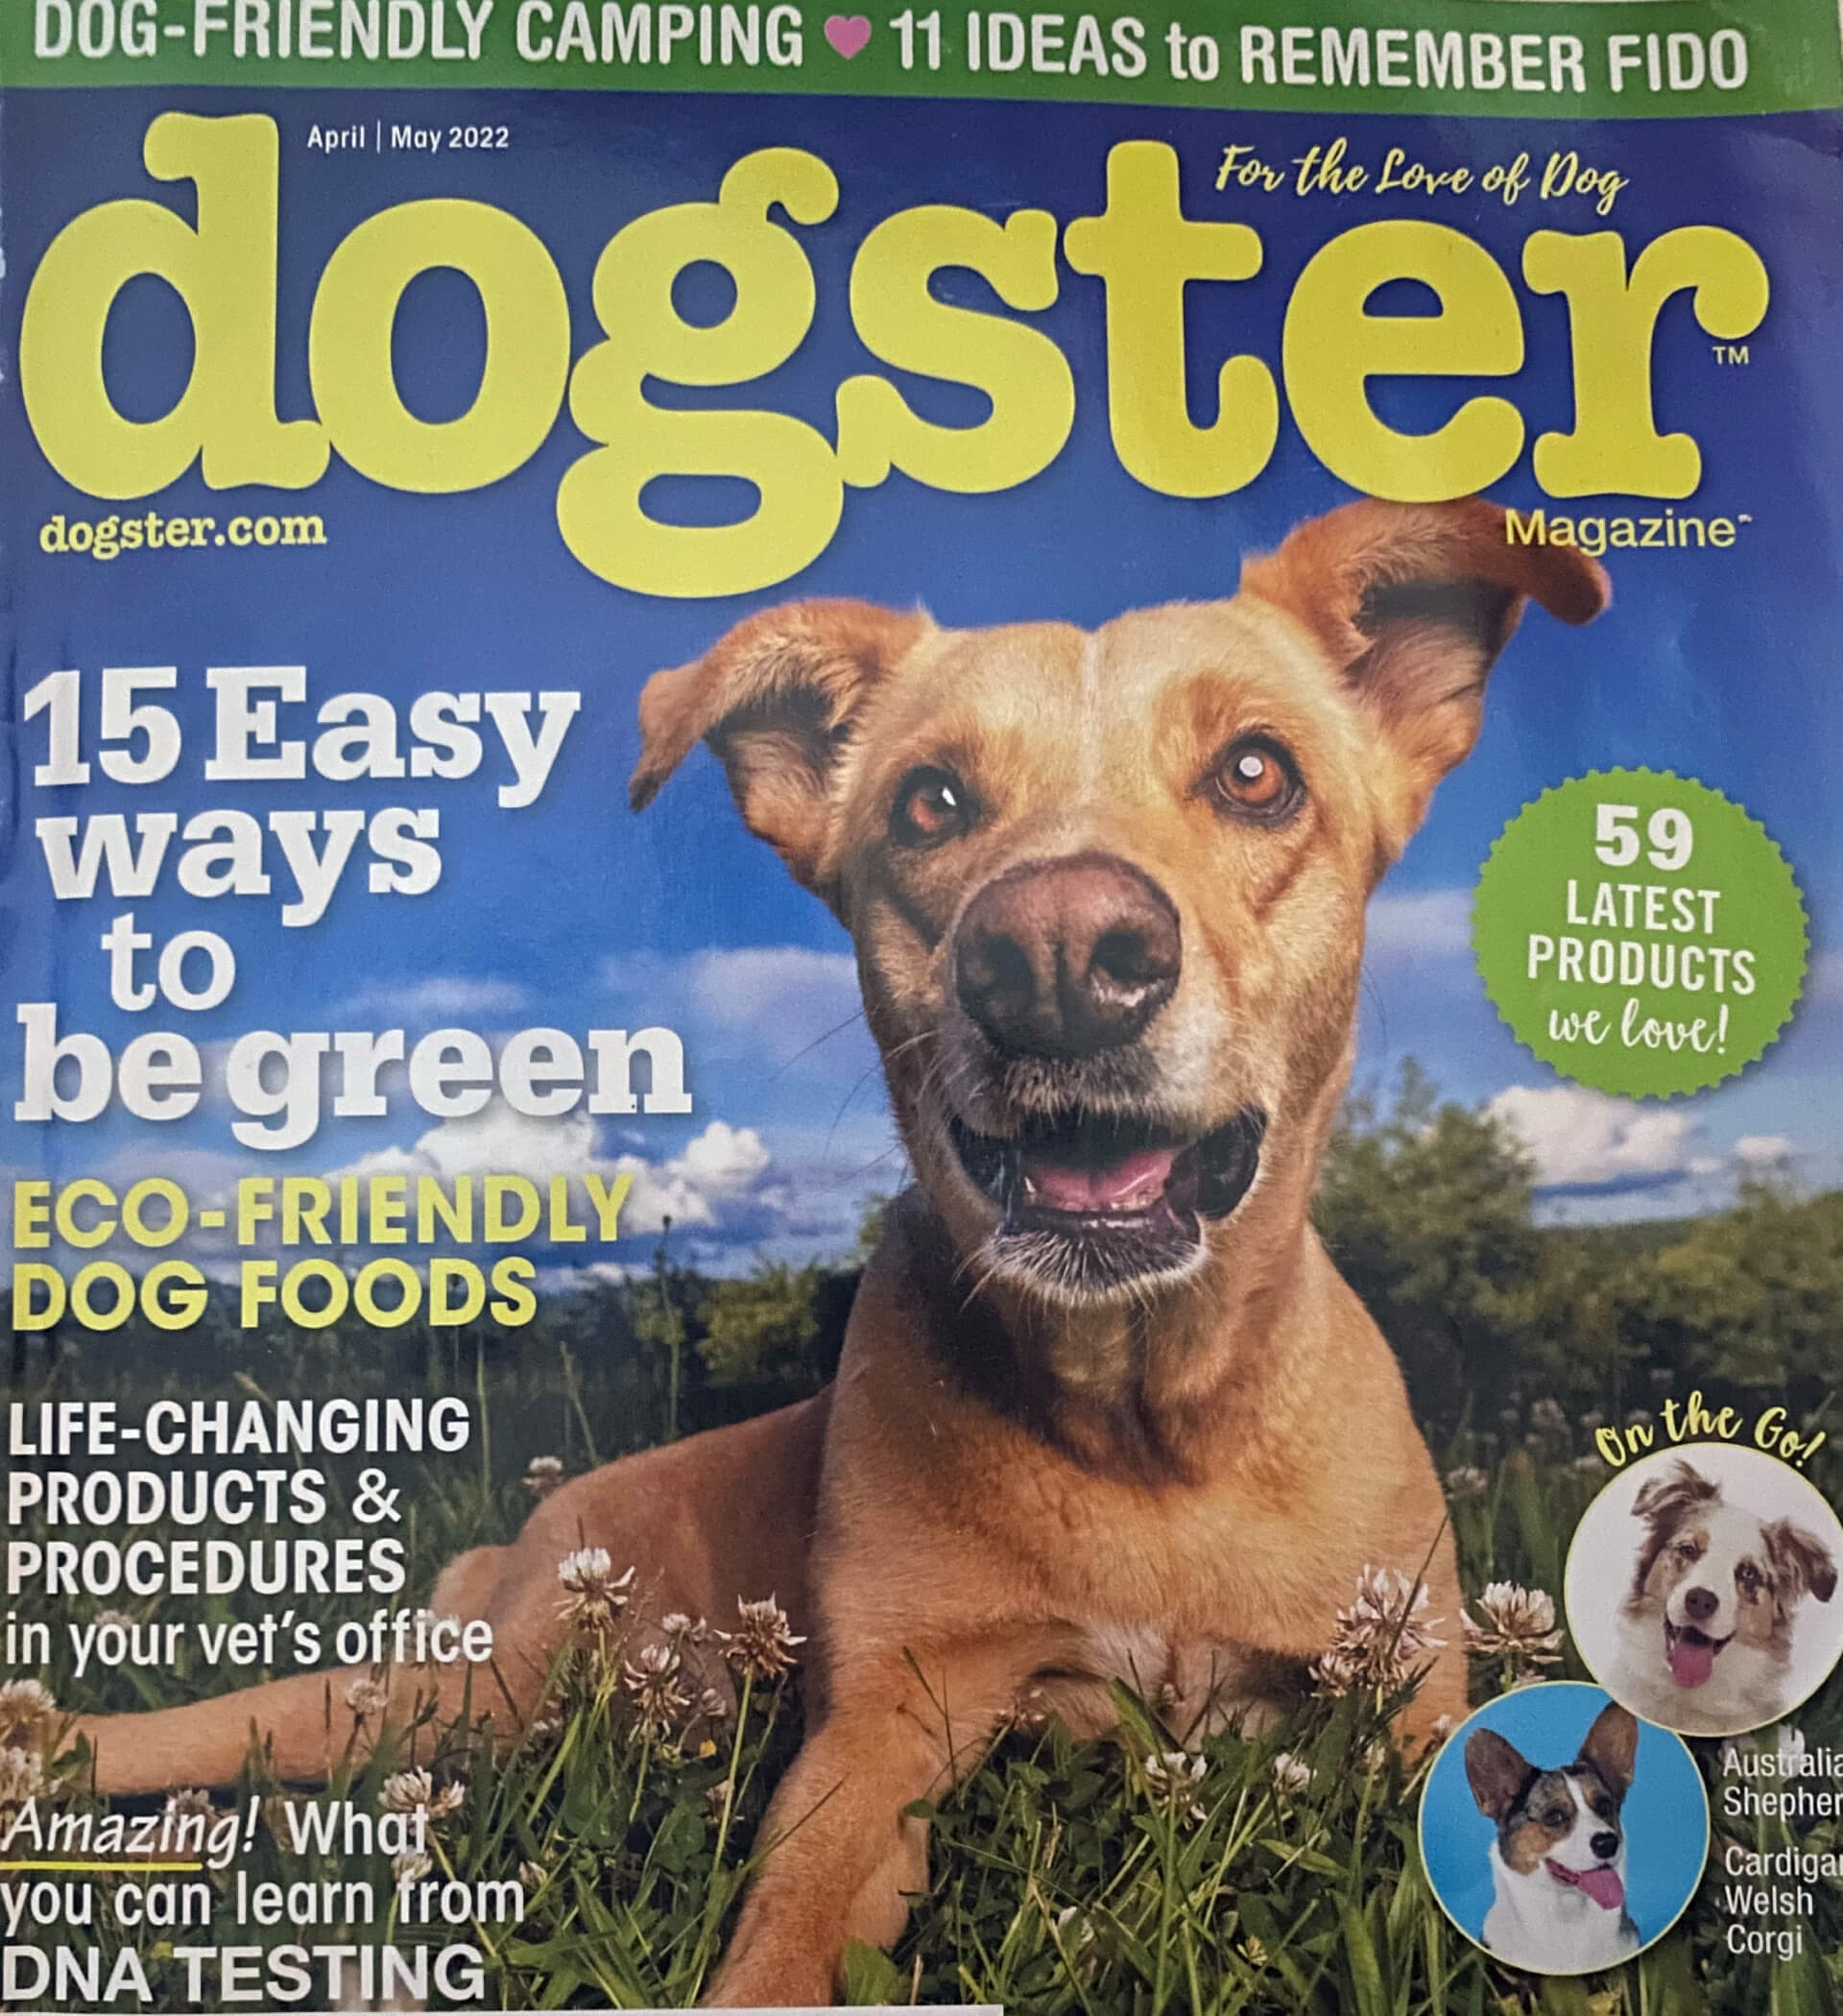 Remembering Fido – Dogster